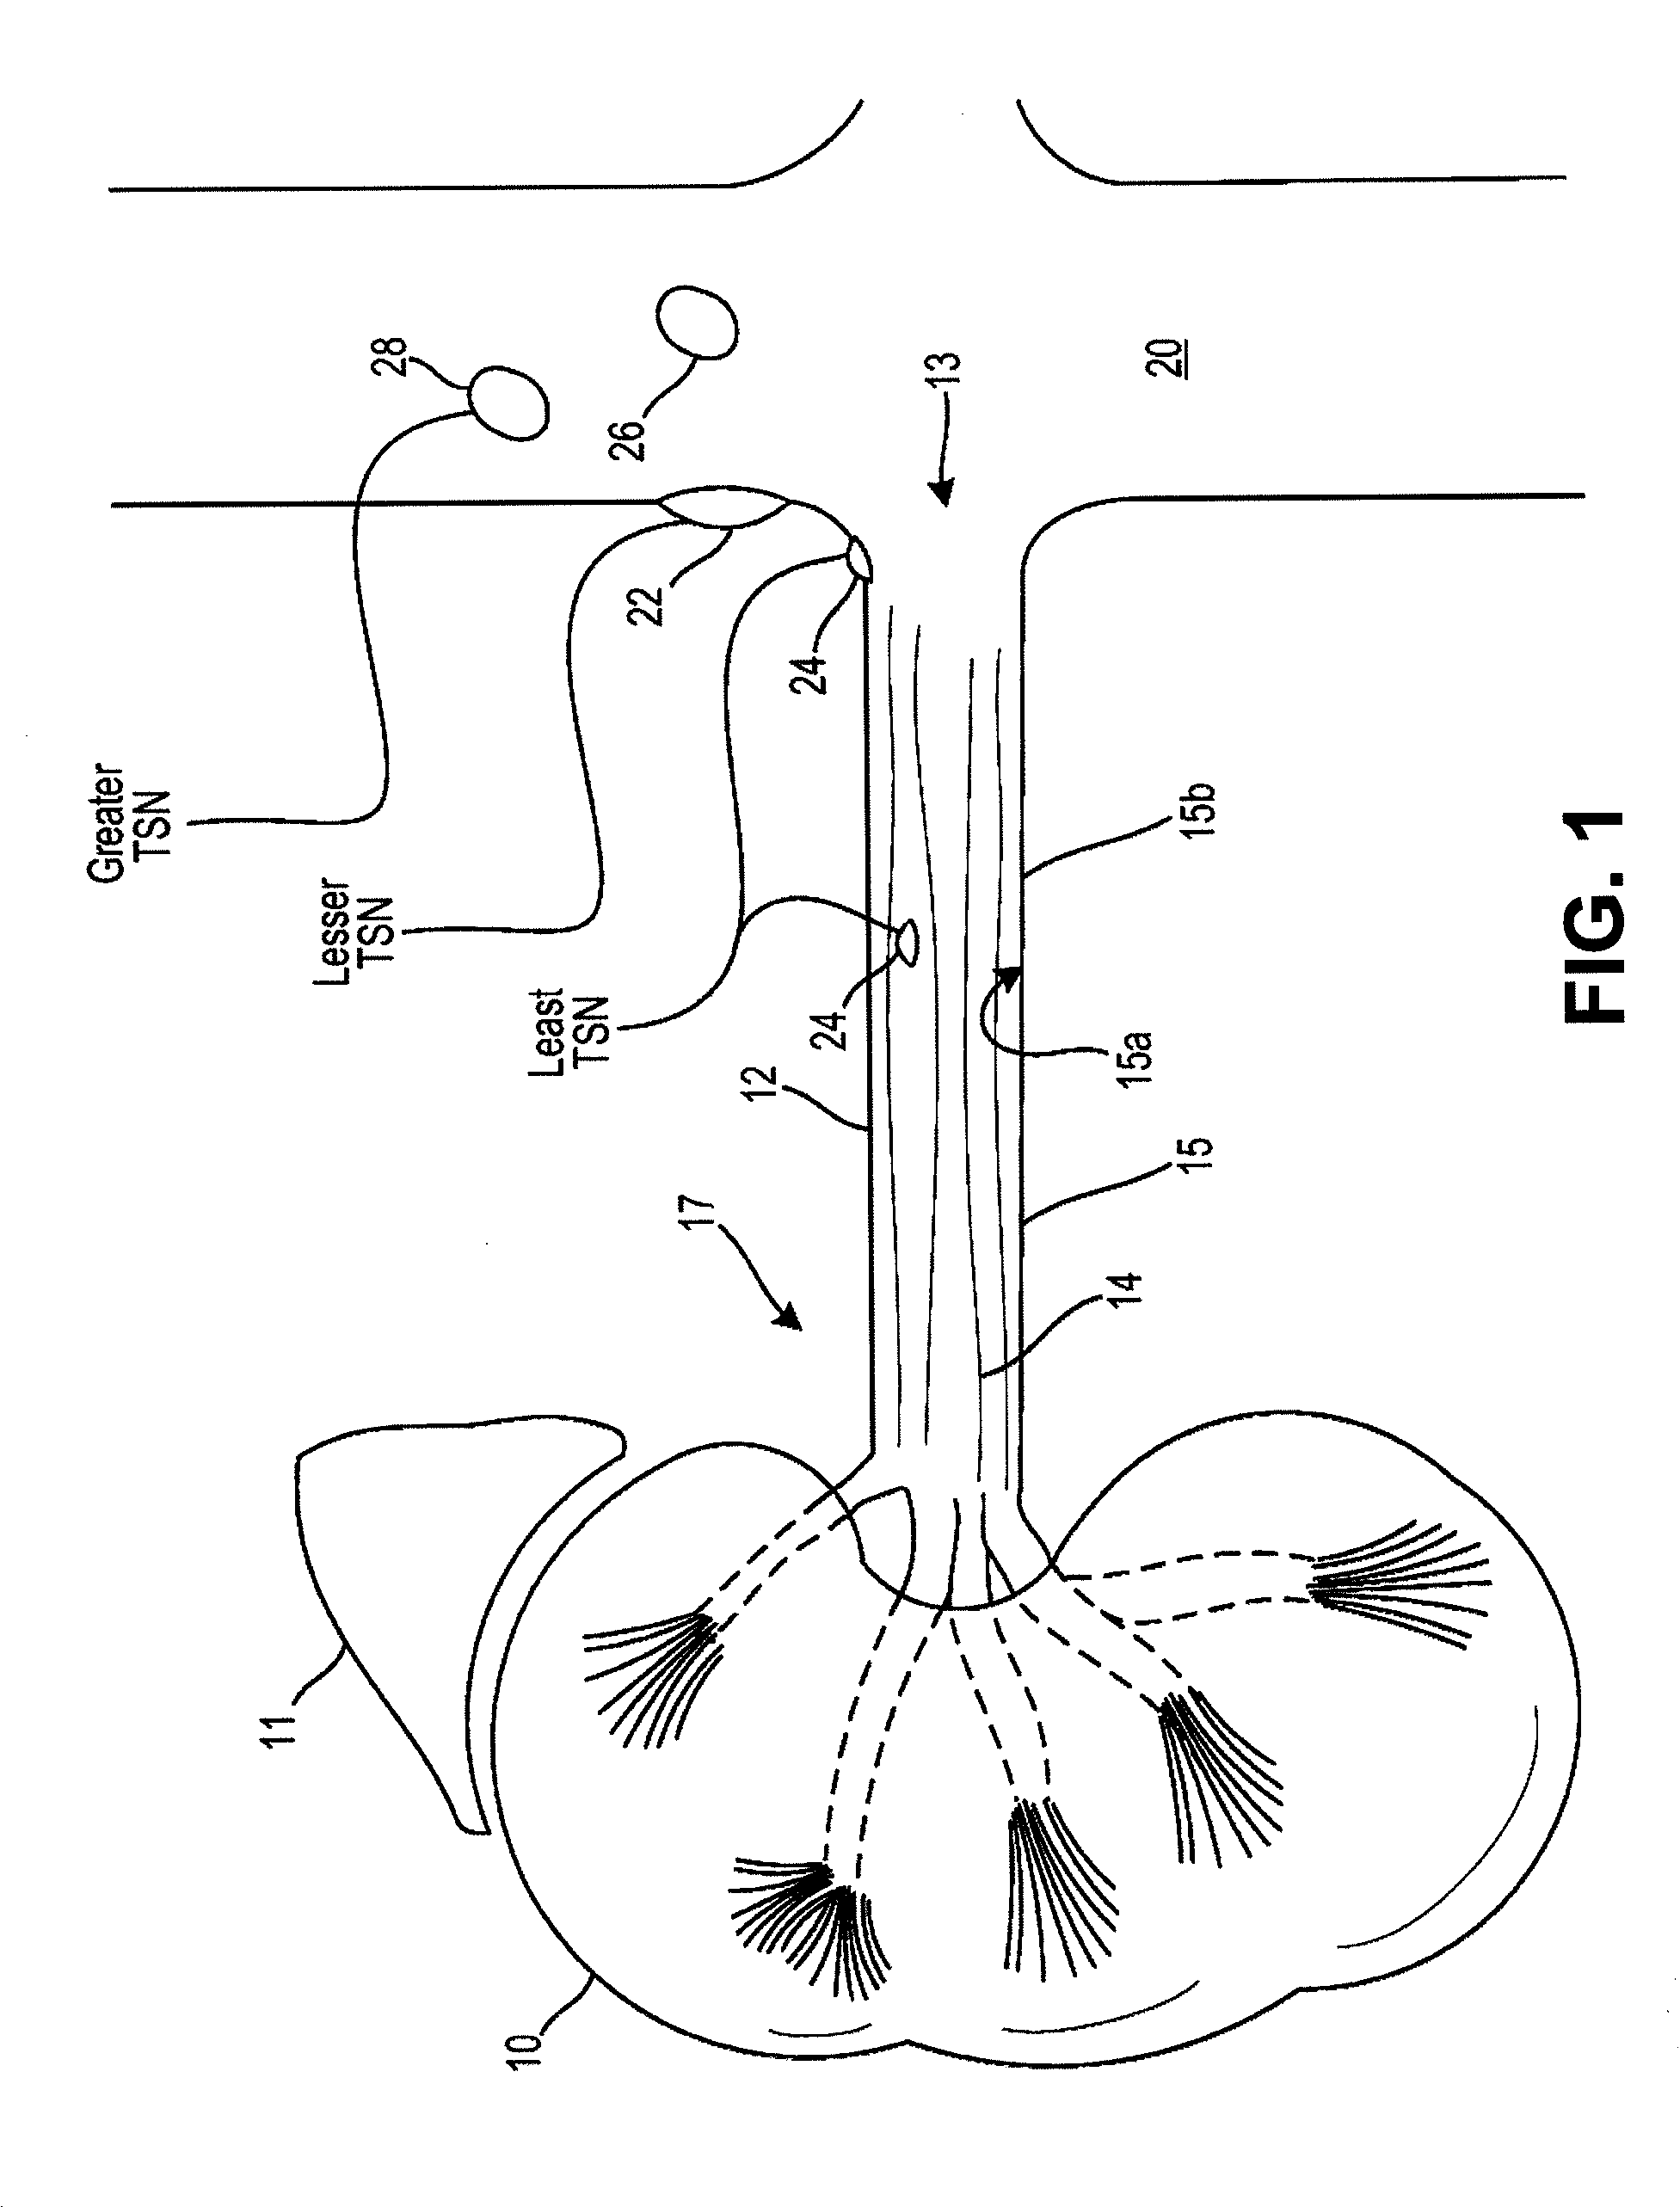 Tissue treatment device and related methods